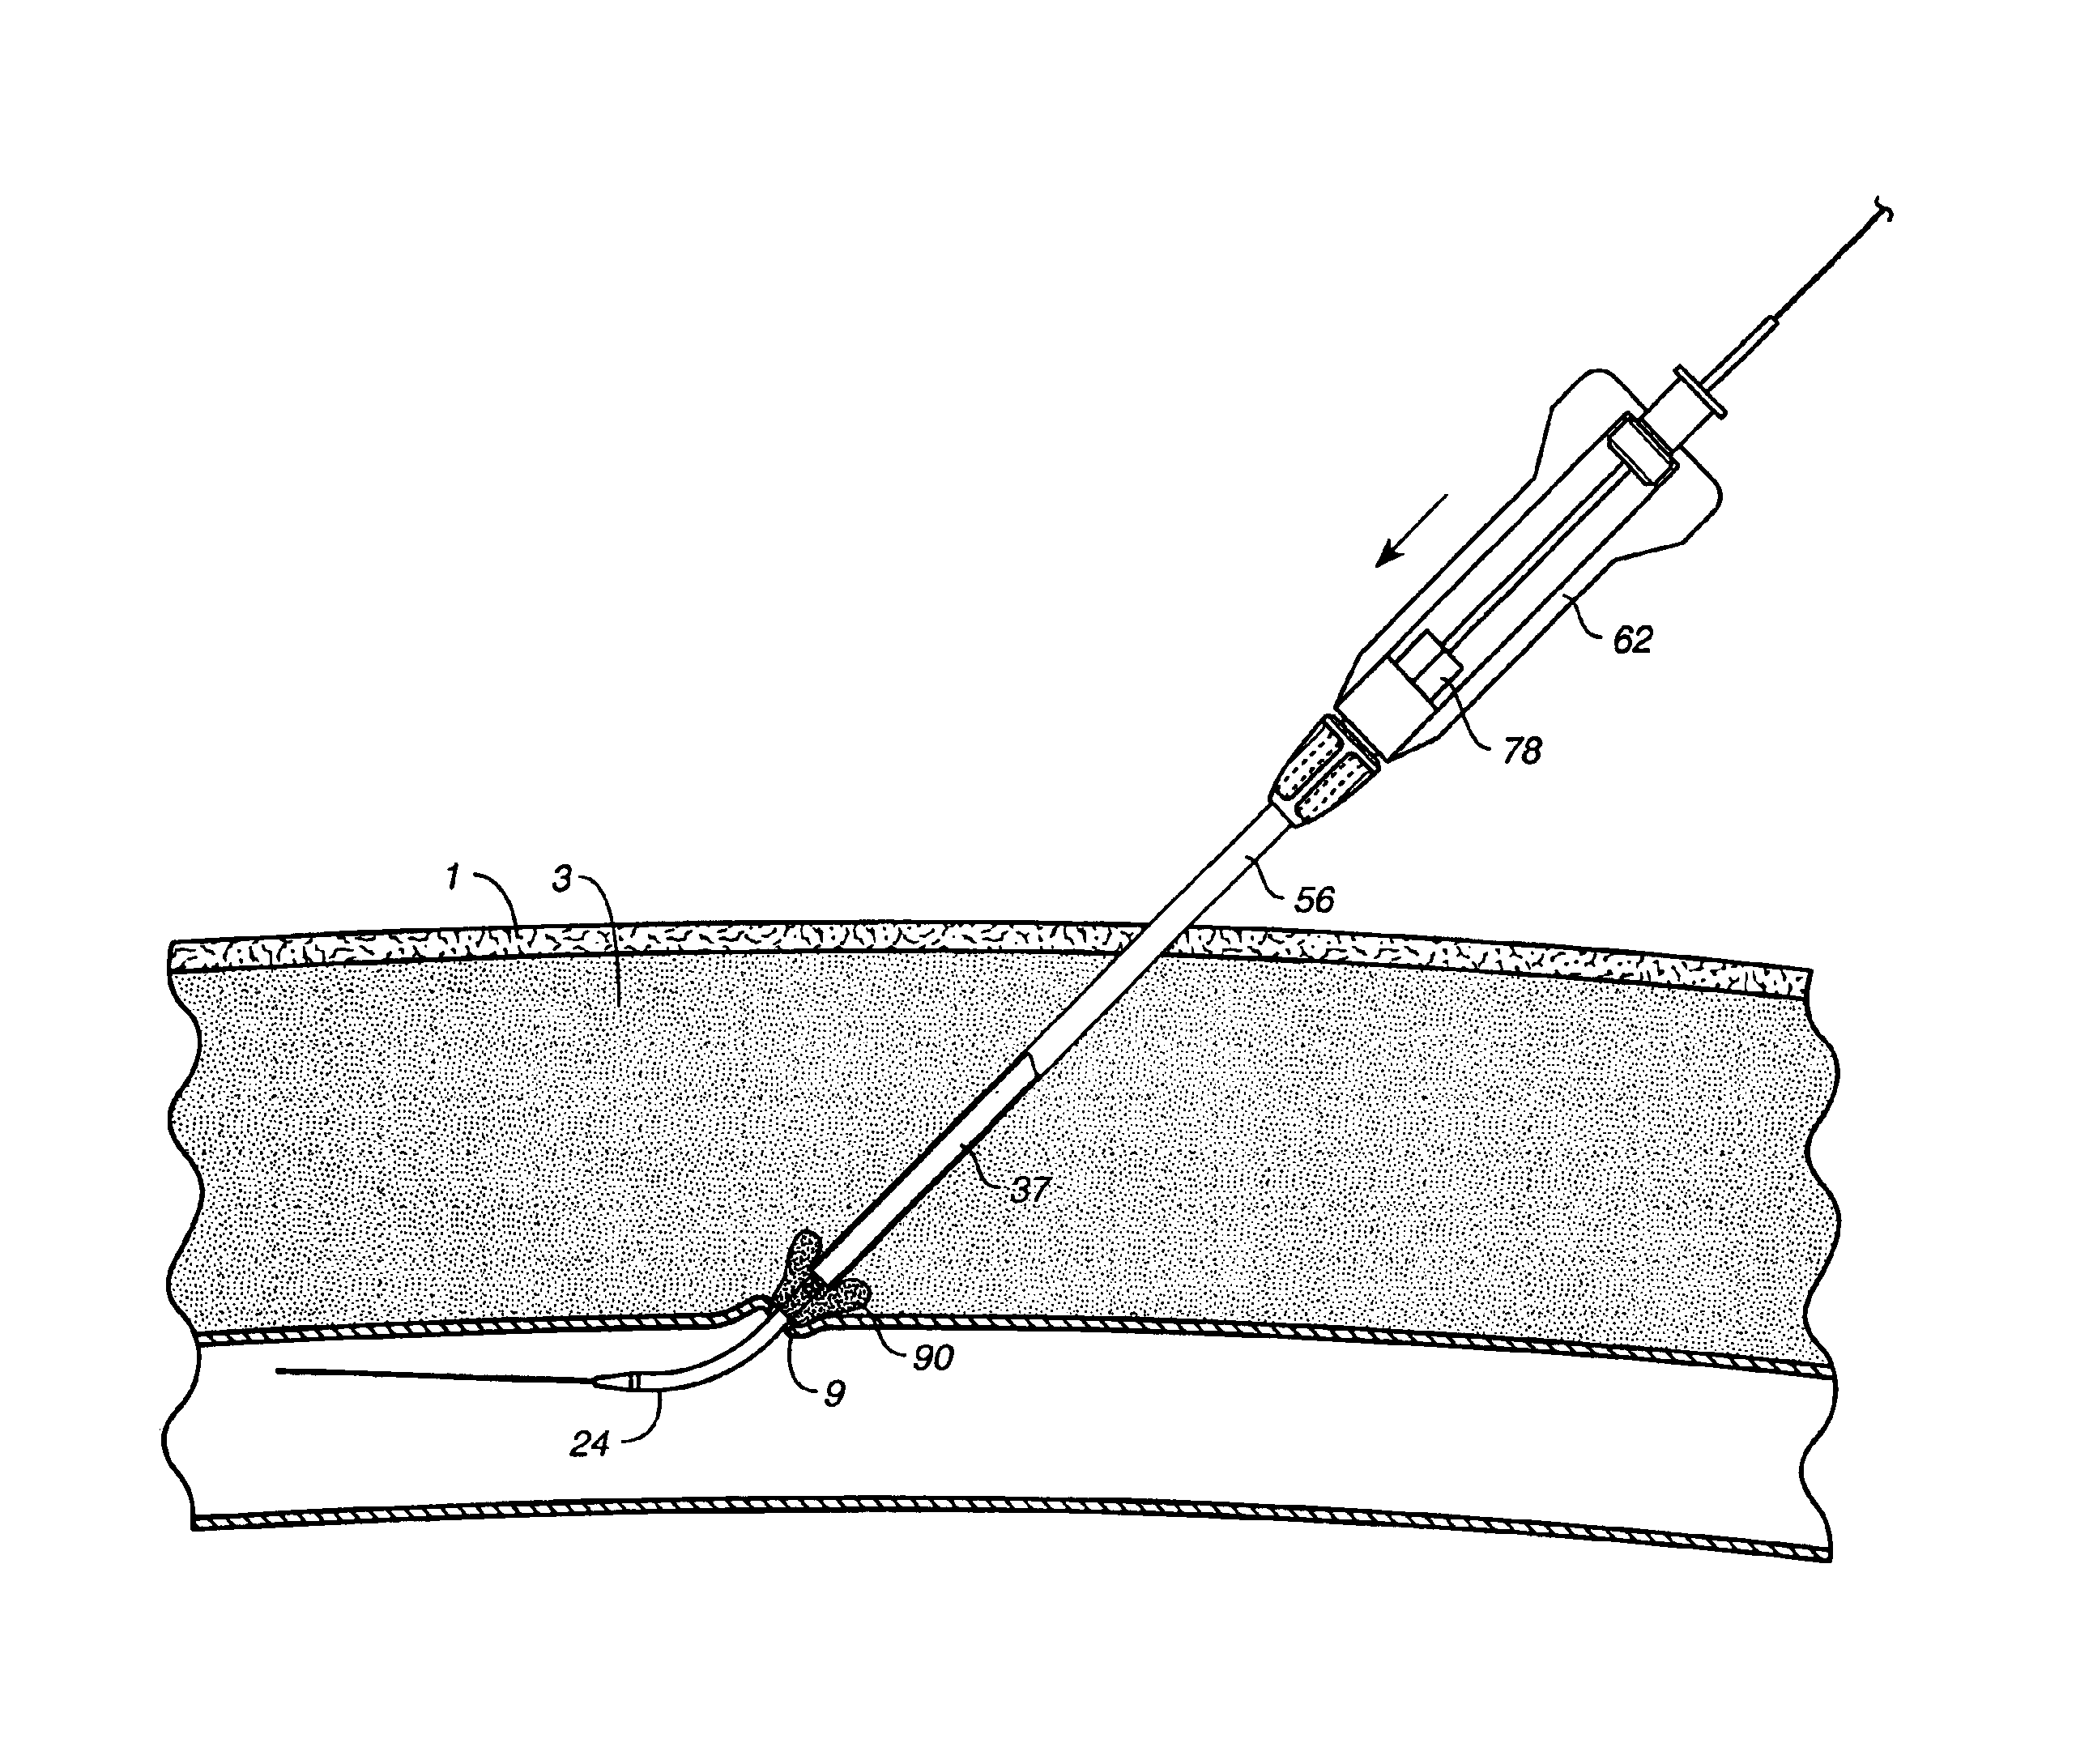 Depth and puncture control for blood vessel hemostasis system